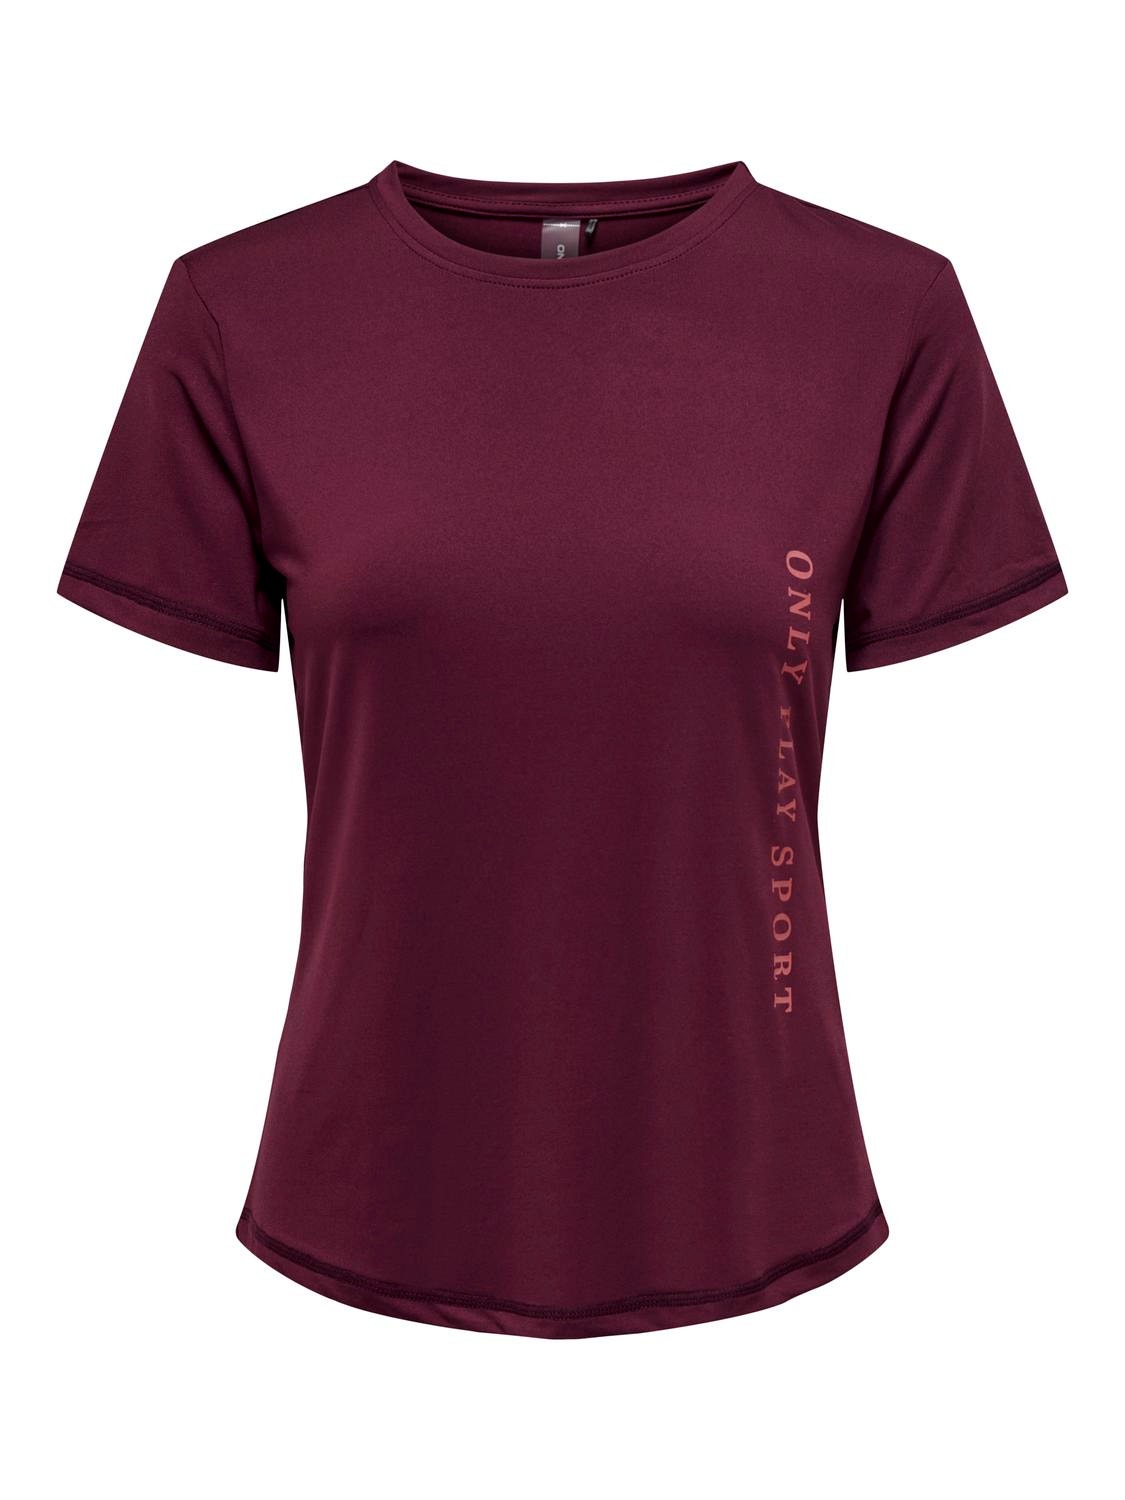 ONLY Training t-shirt with logo -Windsor Wine - 15295208